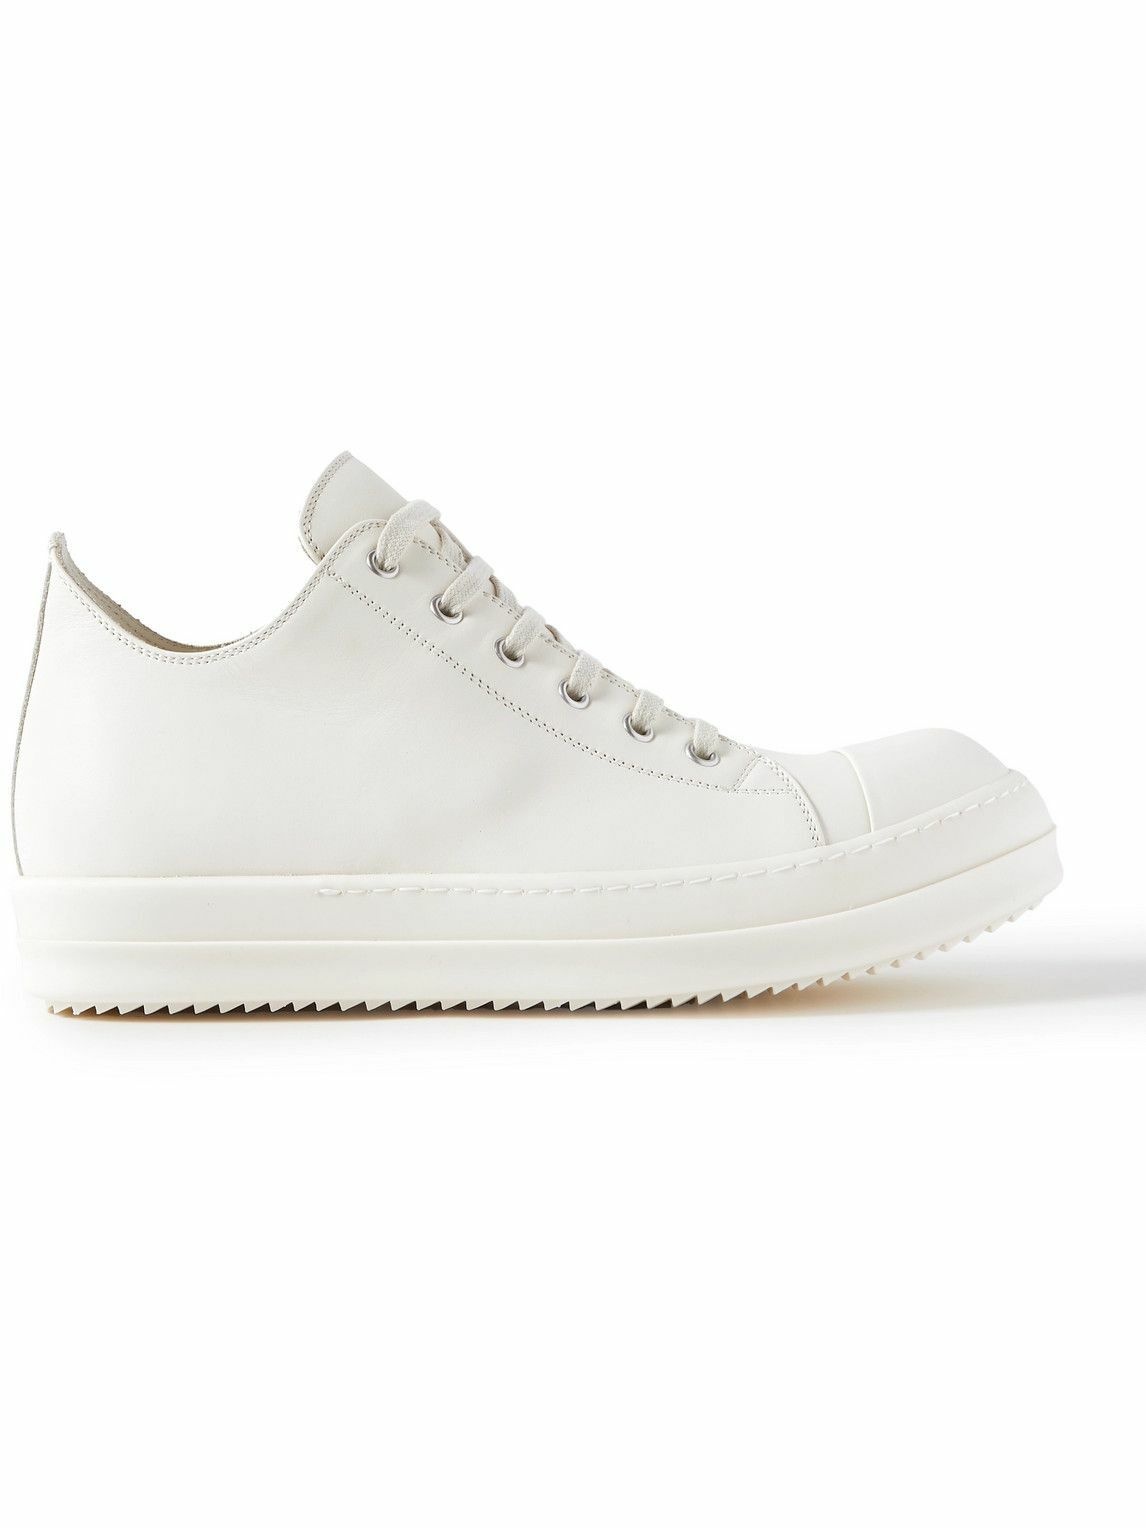 Rick Owens - Leather Sneakers - White Rick Owens